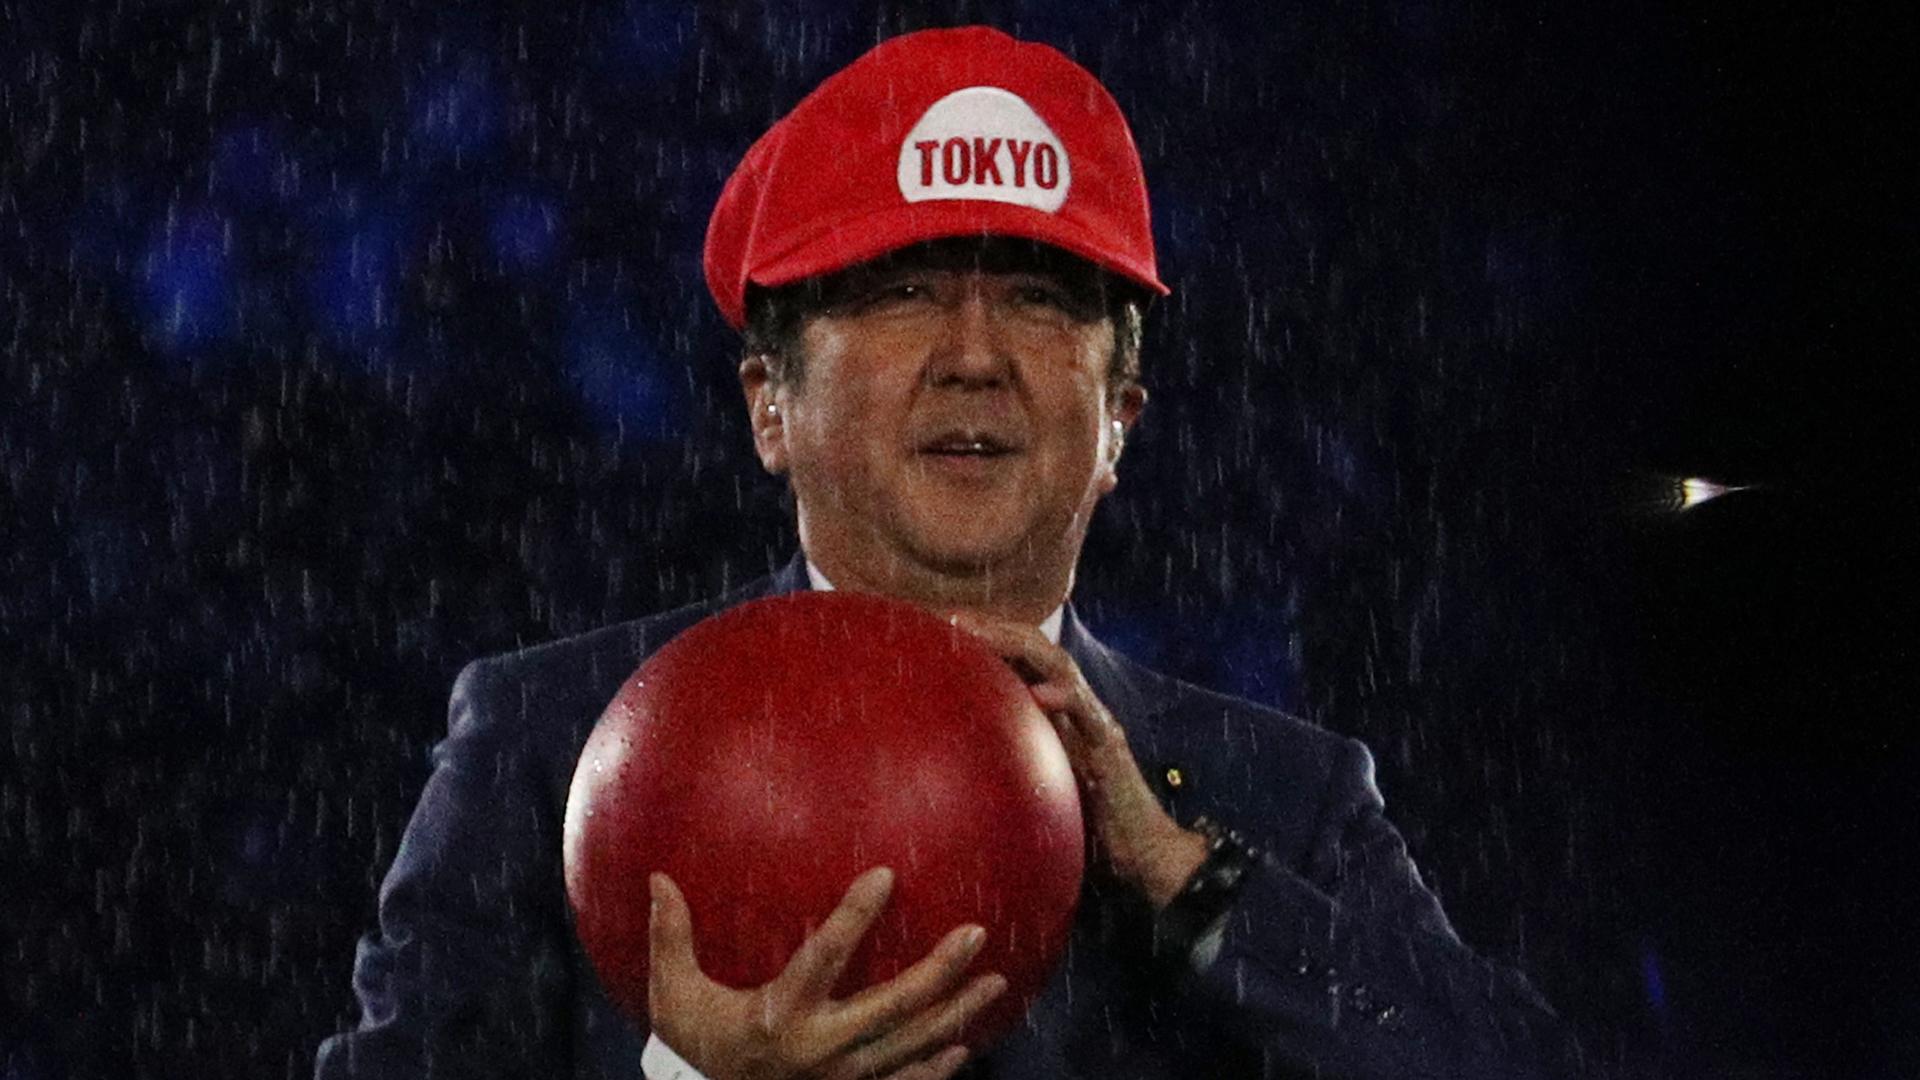 Prime Minister of Japan Shinzo Abe is seen on stage dressed as Super Mario.